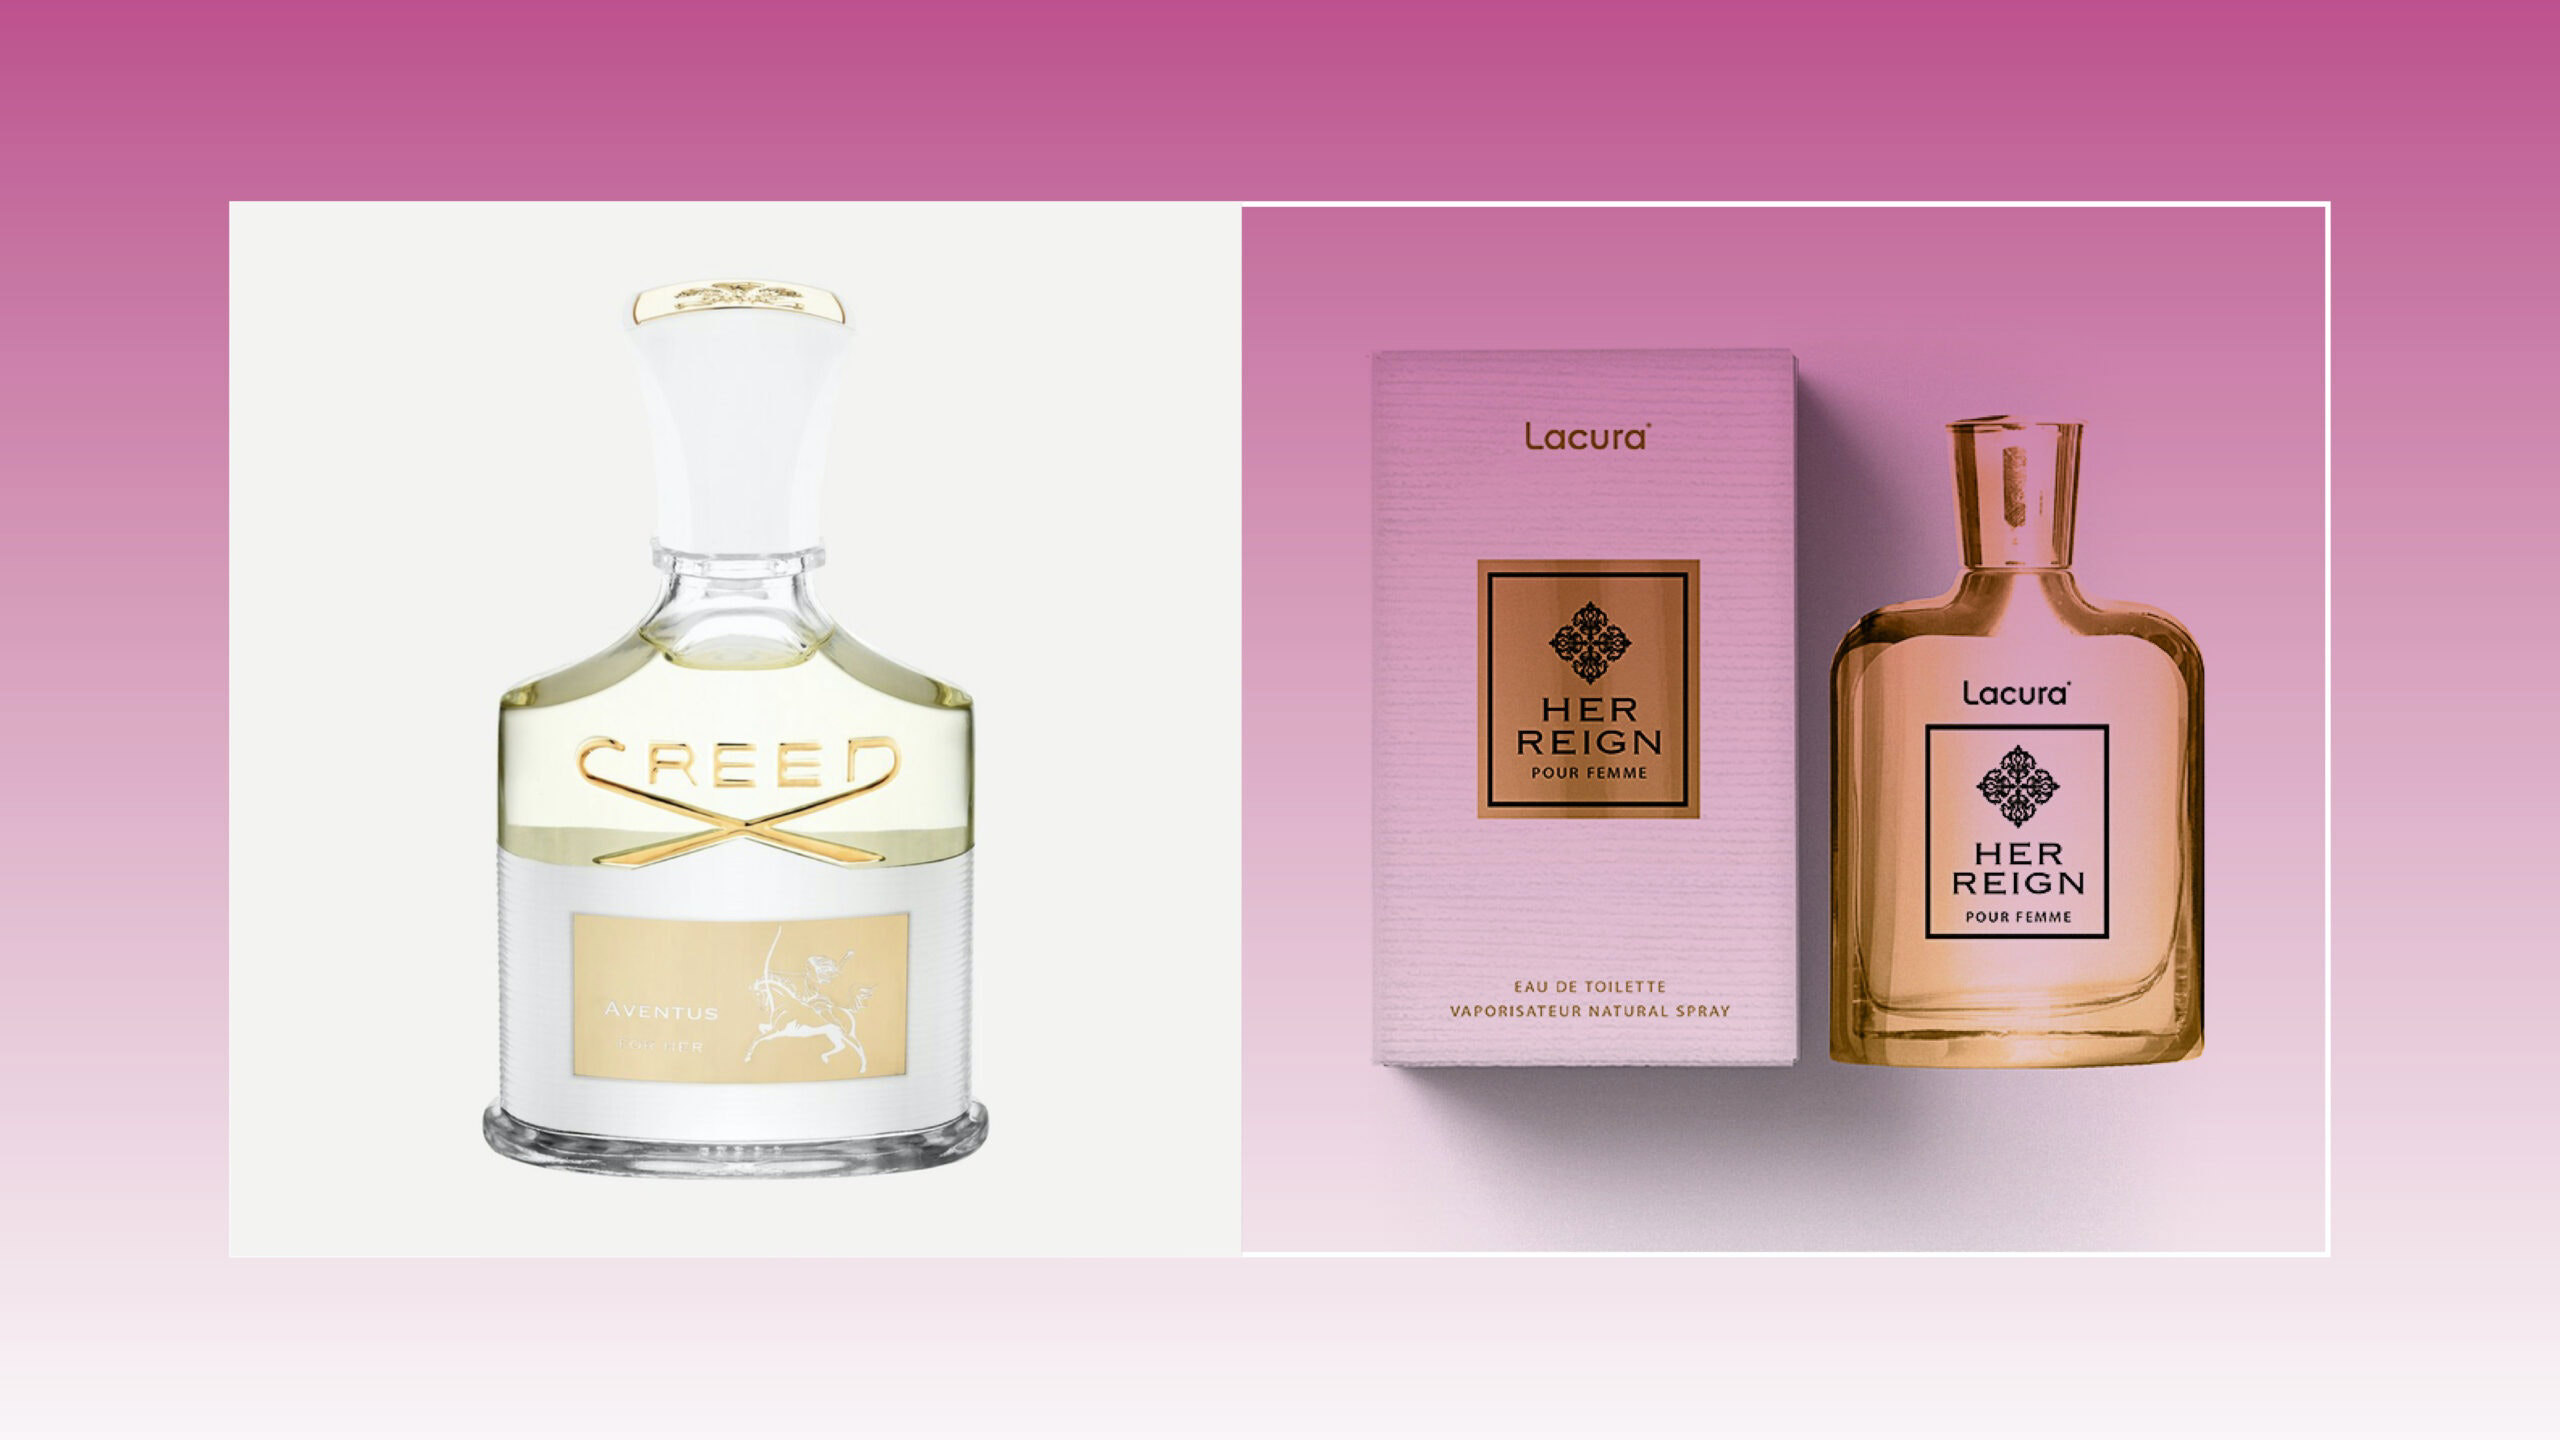 Aldi launches six perfumes for £6.99 each - and they're dupes of